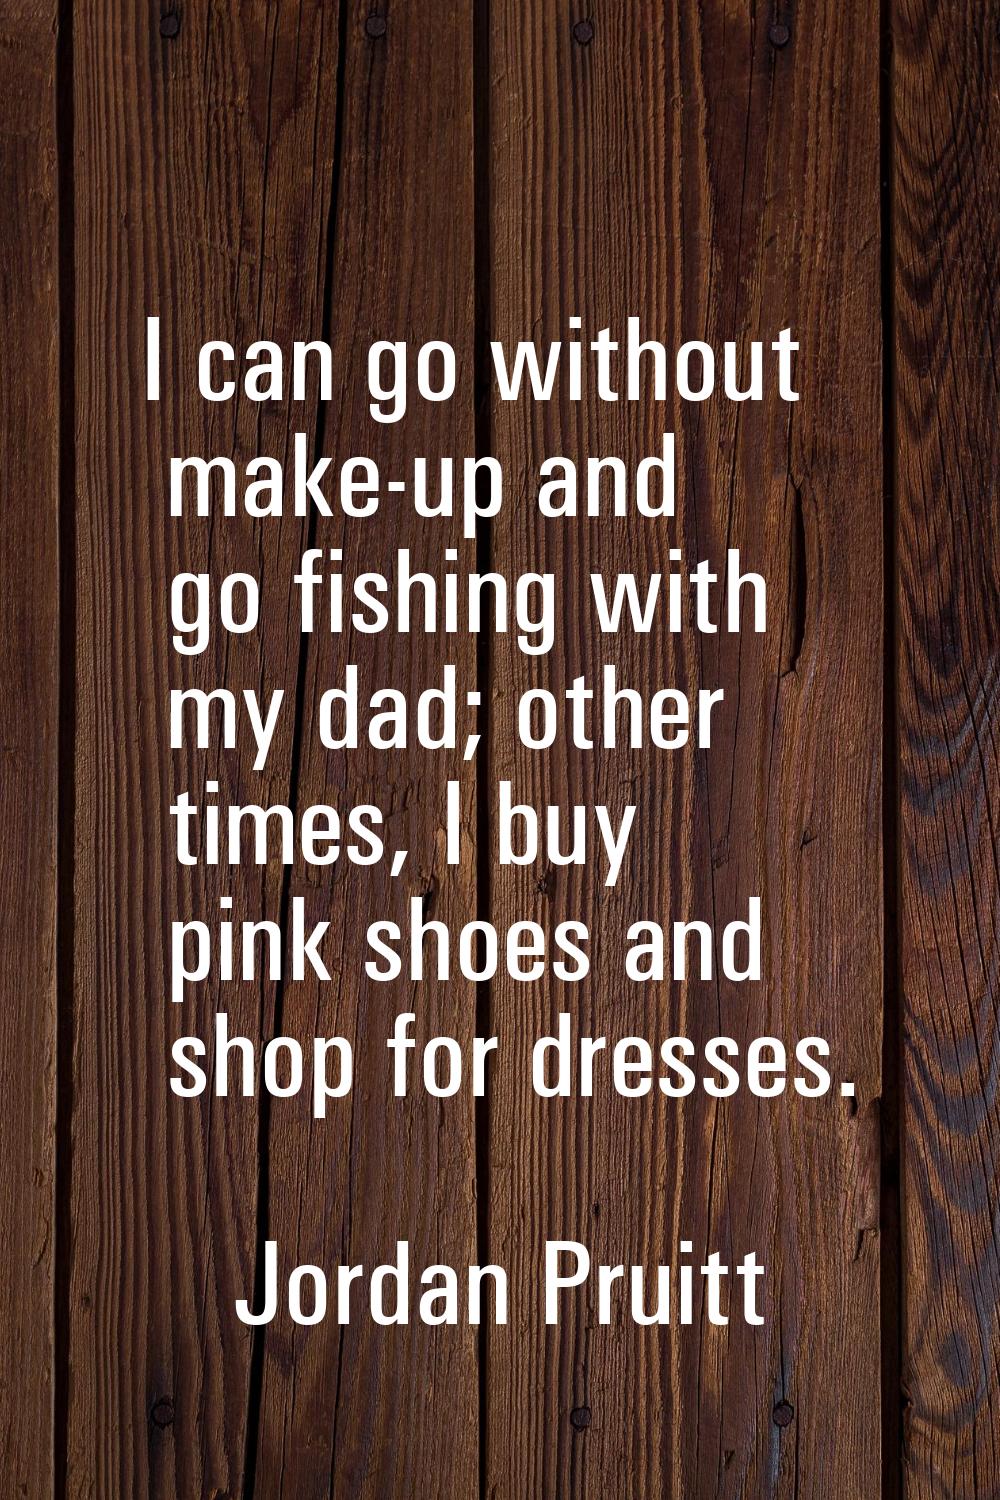 I can go without make-up and go fishing with my dad; other times, I buy pink shoes and shop for dre